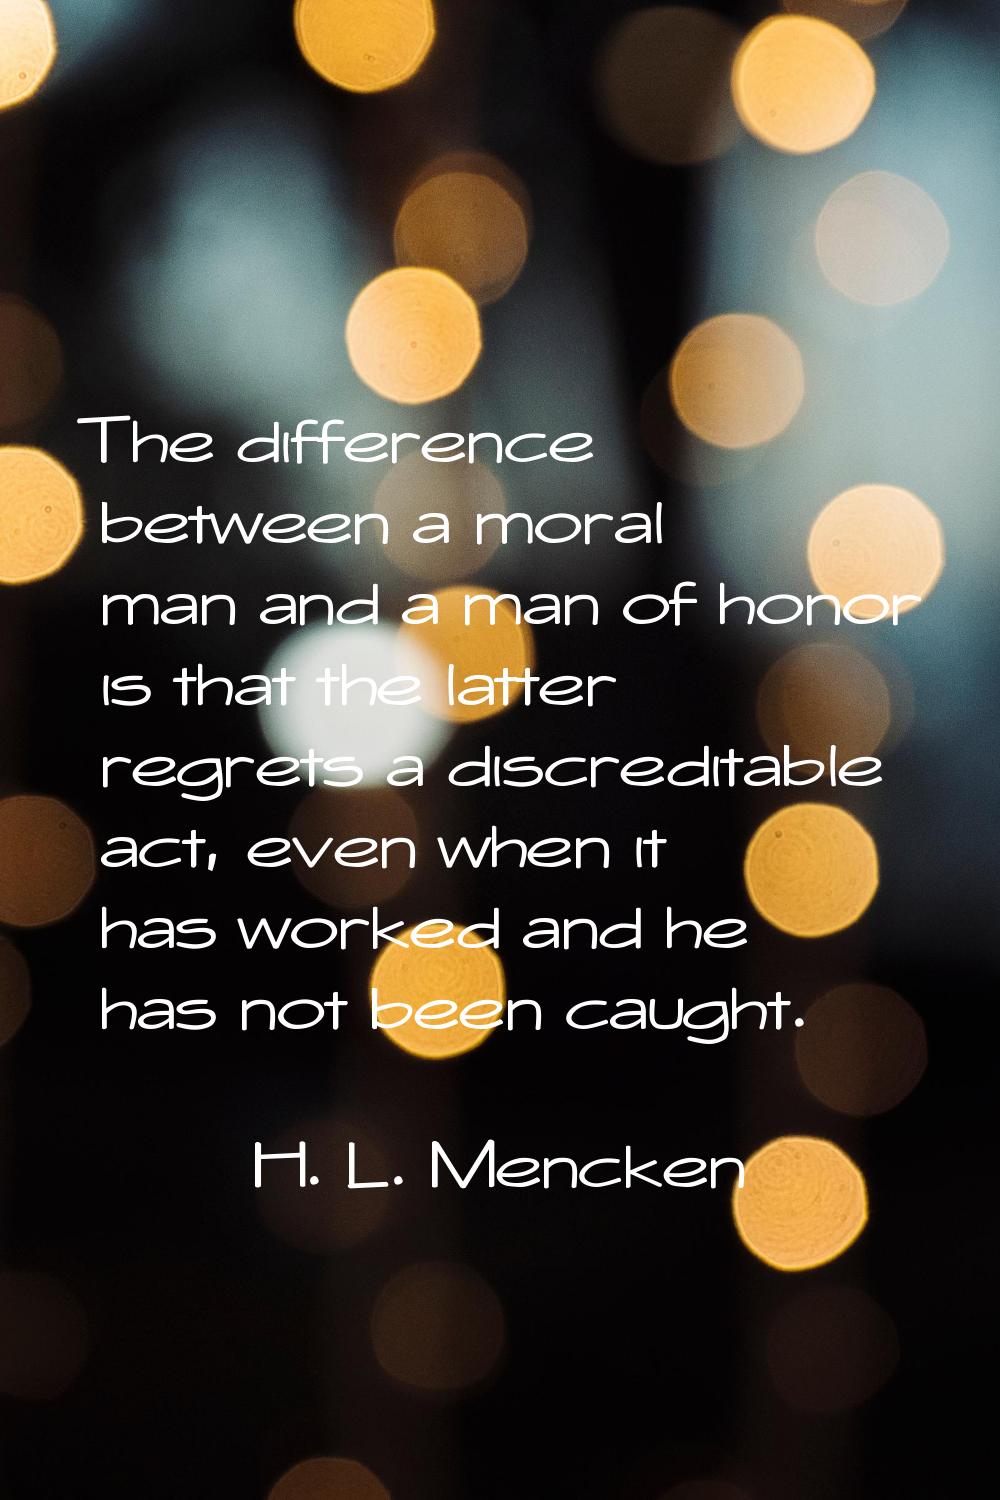 The difference between a moral man and a man of honor is that the latter regrets a discreditable ac